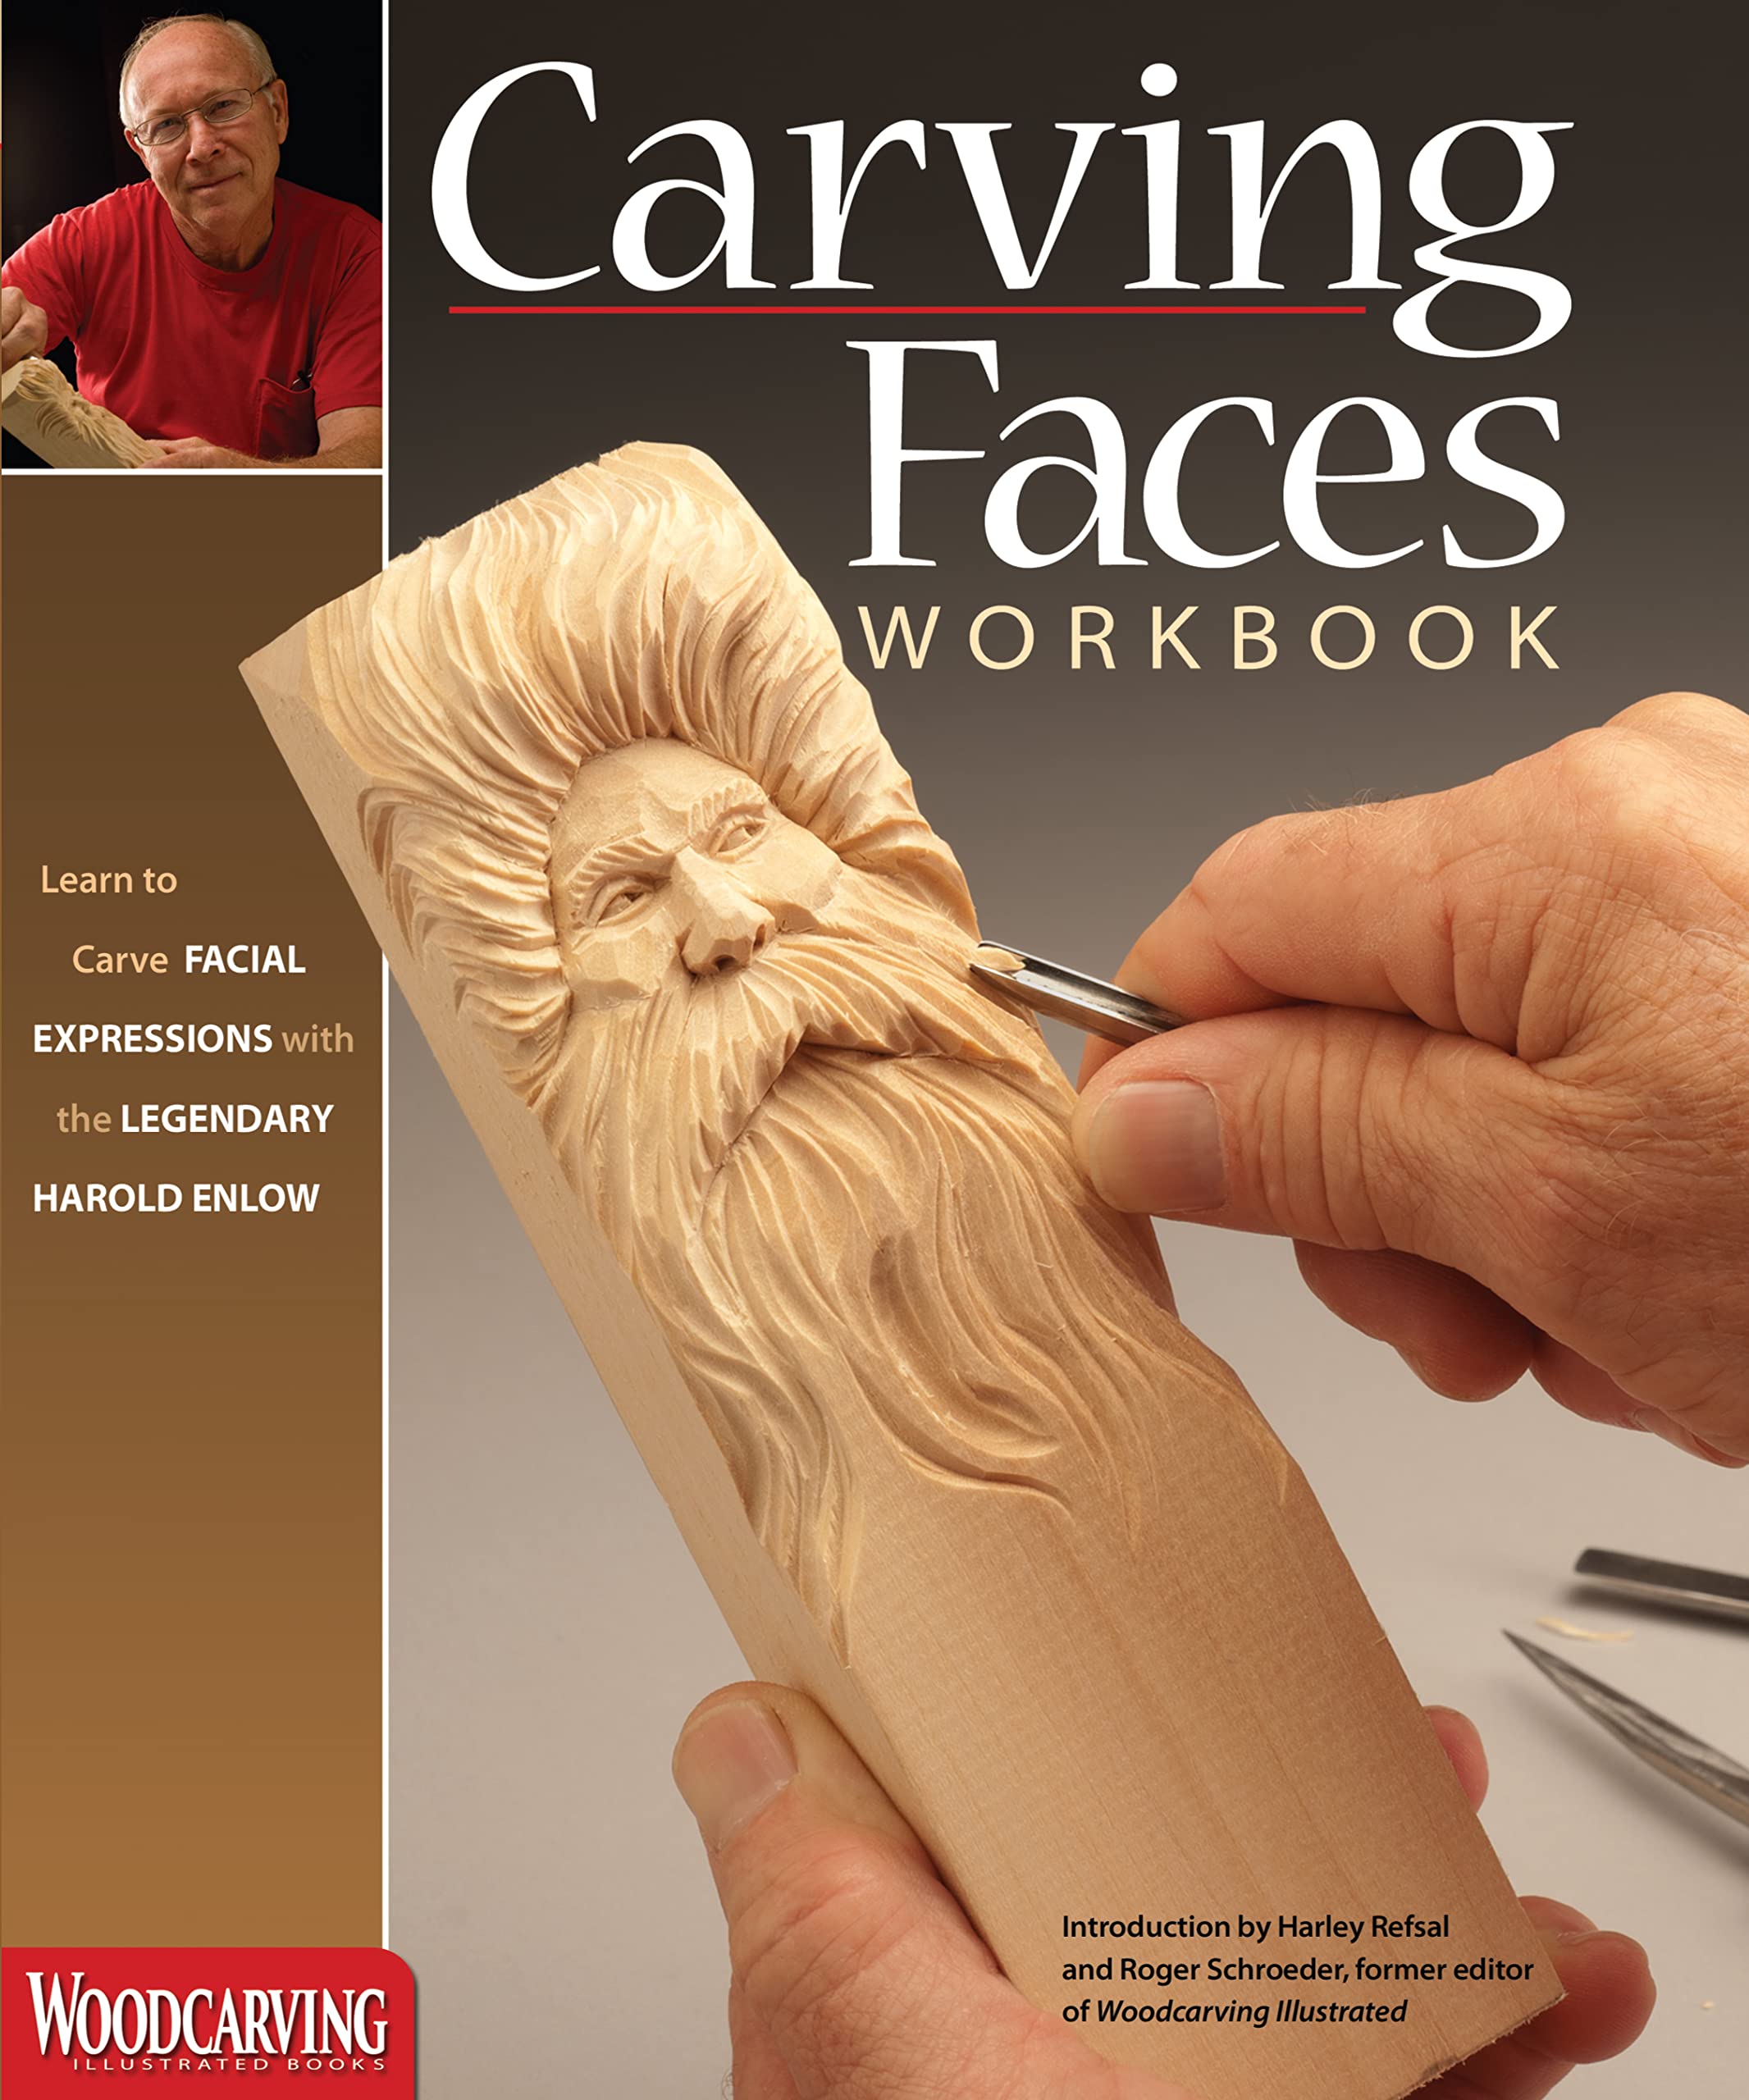 Book Cover Carving Faces Workbook: Learn to Carve Facial Expressions with the Legendary Harold Enlow (Fox Chapel Publishing) Detailed Lips, Eyes, Noses, and Hair to Add Expressive Life to Your Woodcarvings